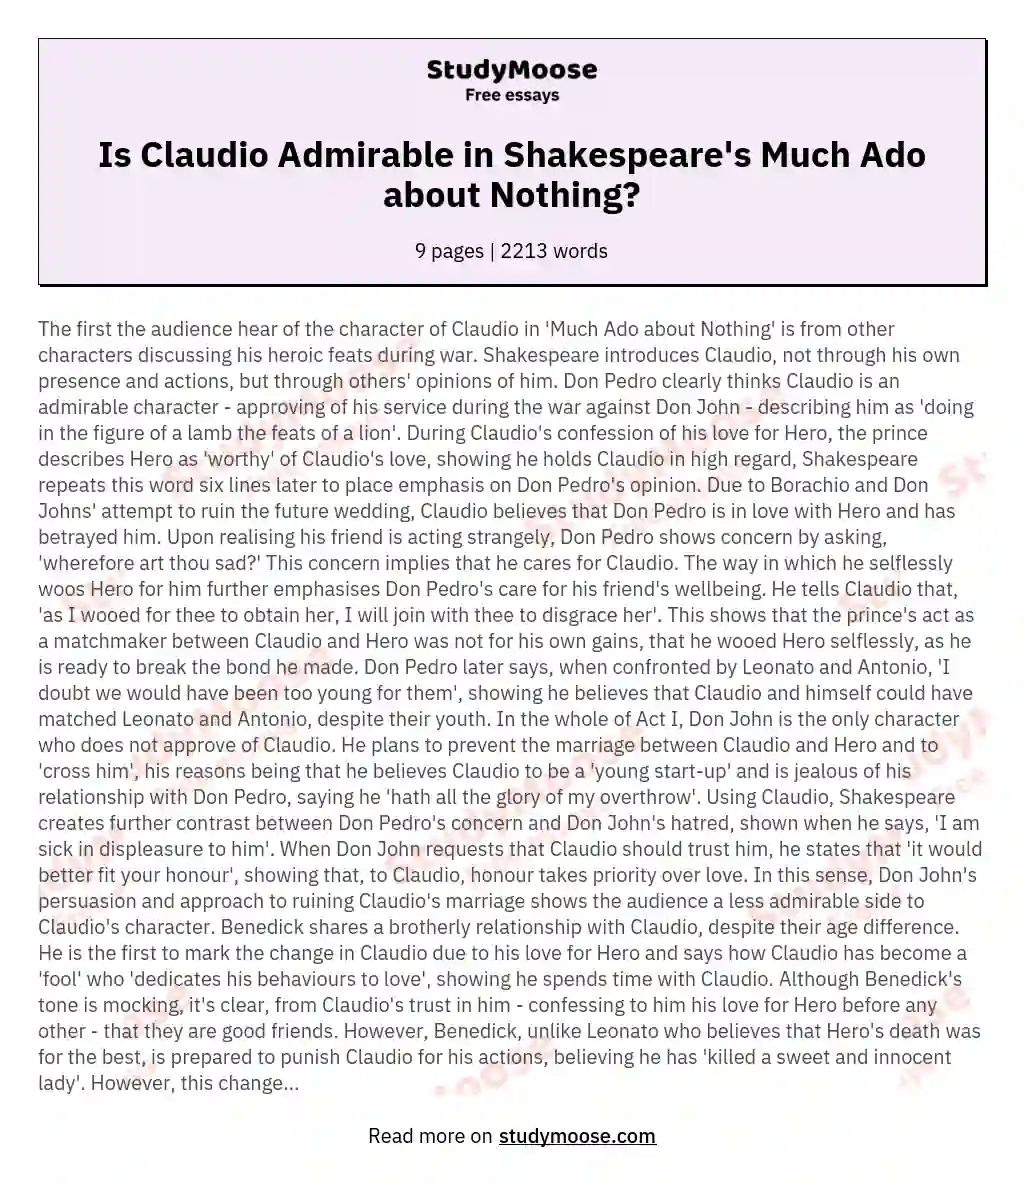 Is Claudio Admirable in Shakespeare's Much Ado about Nothing?